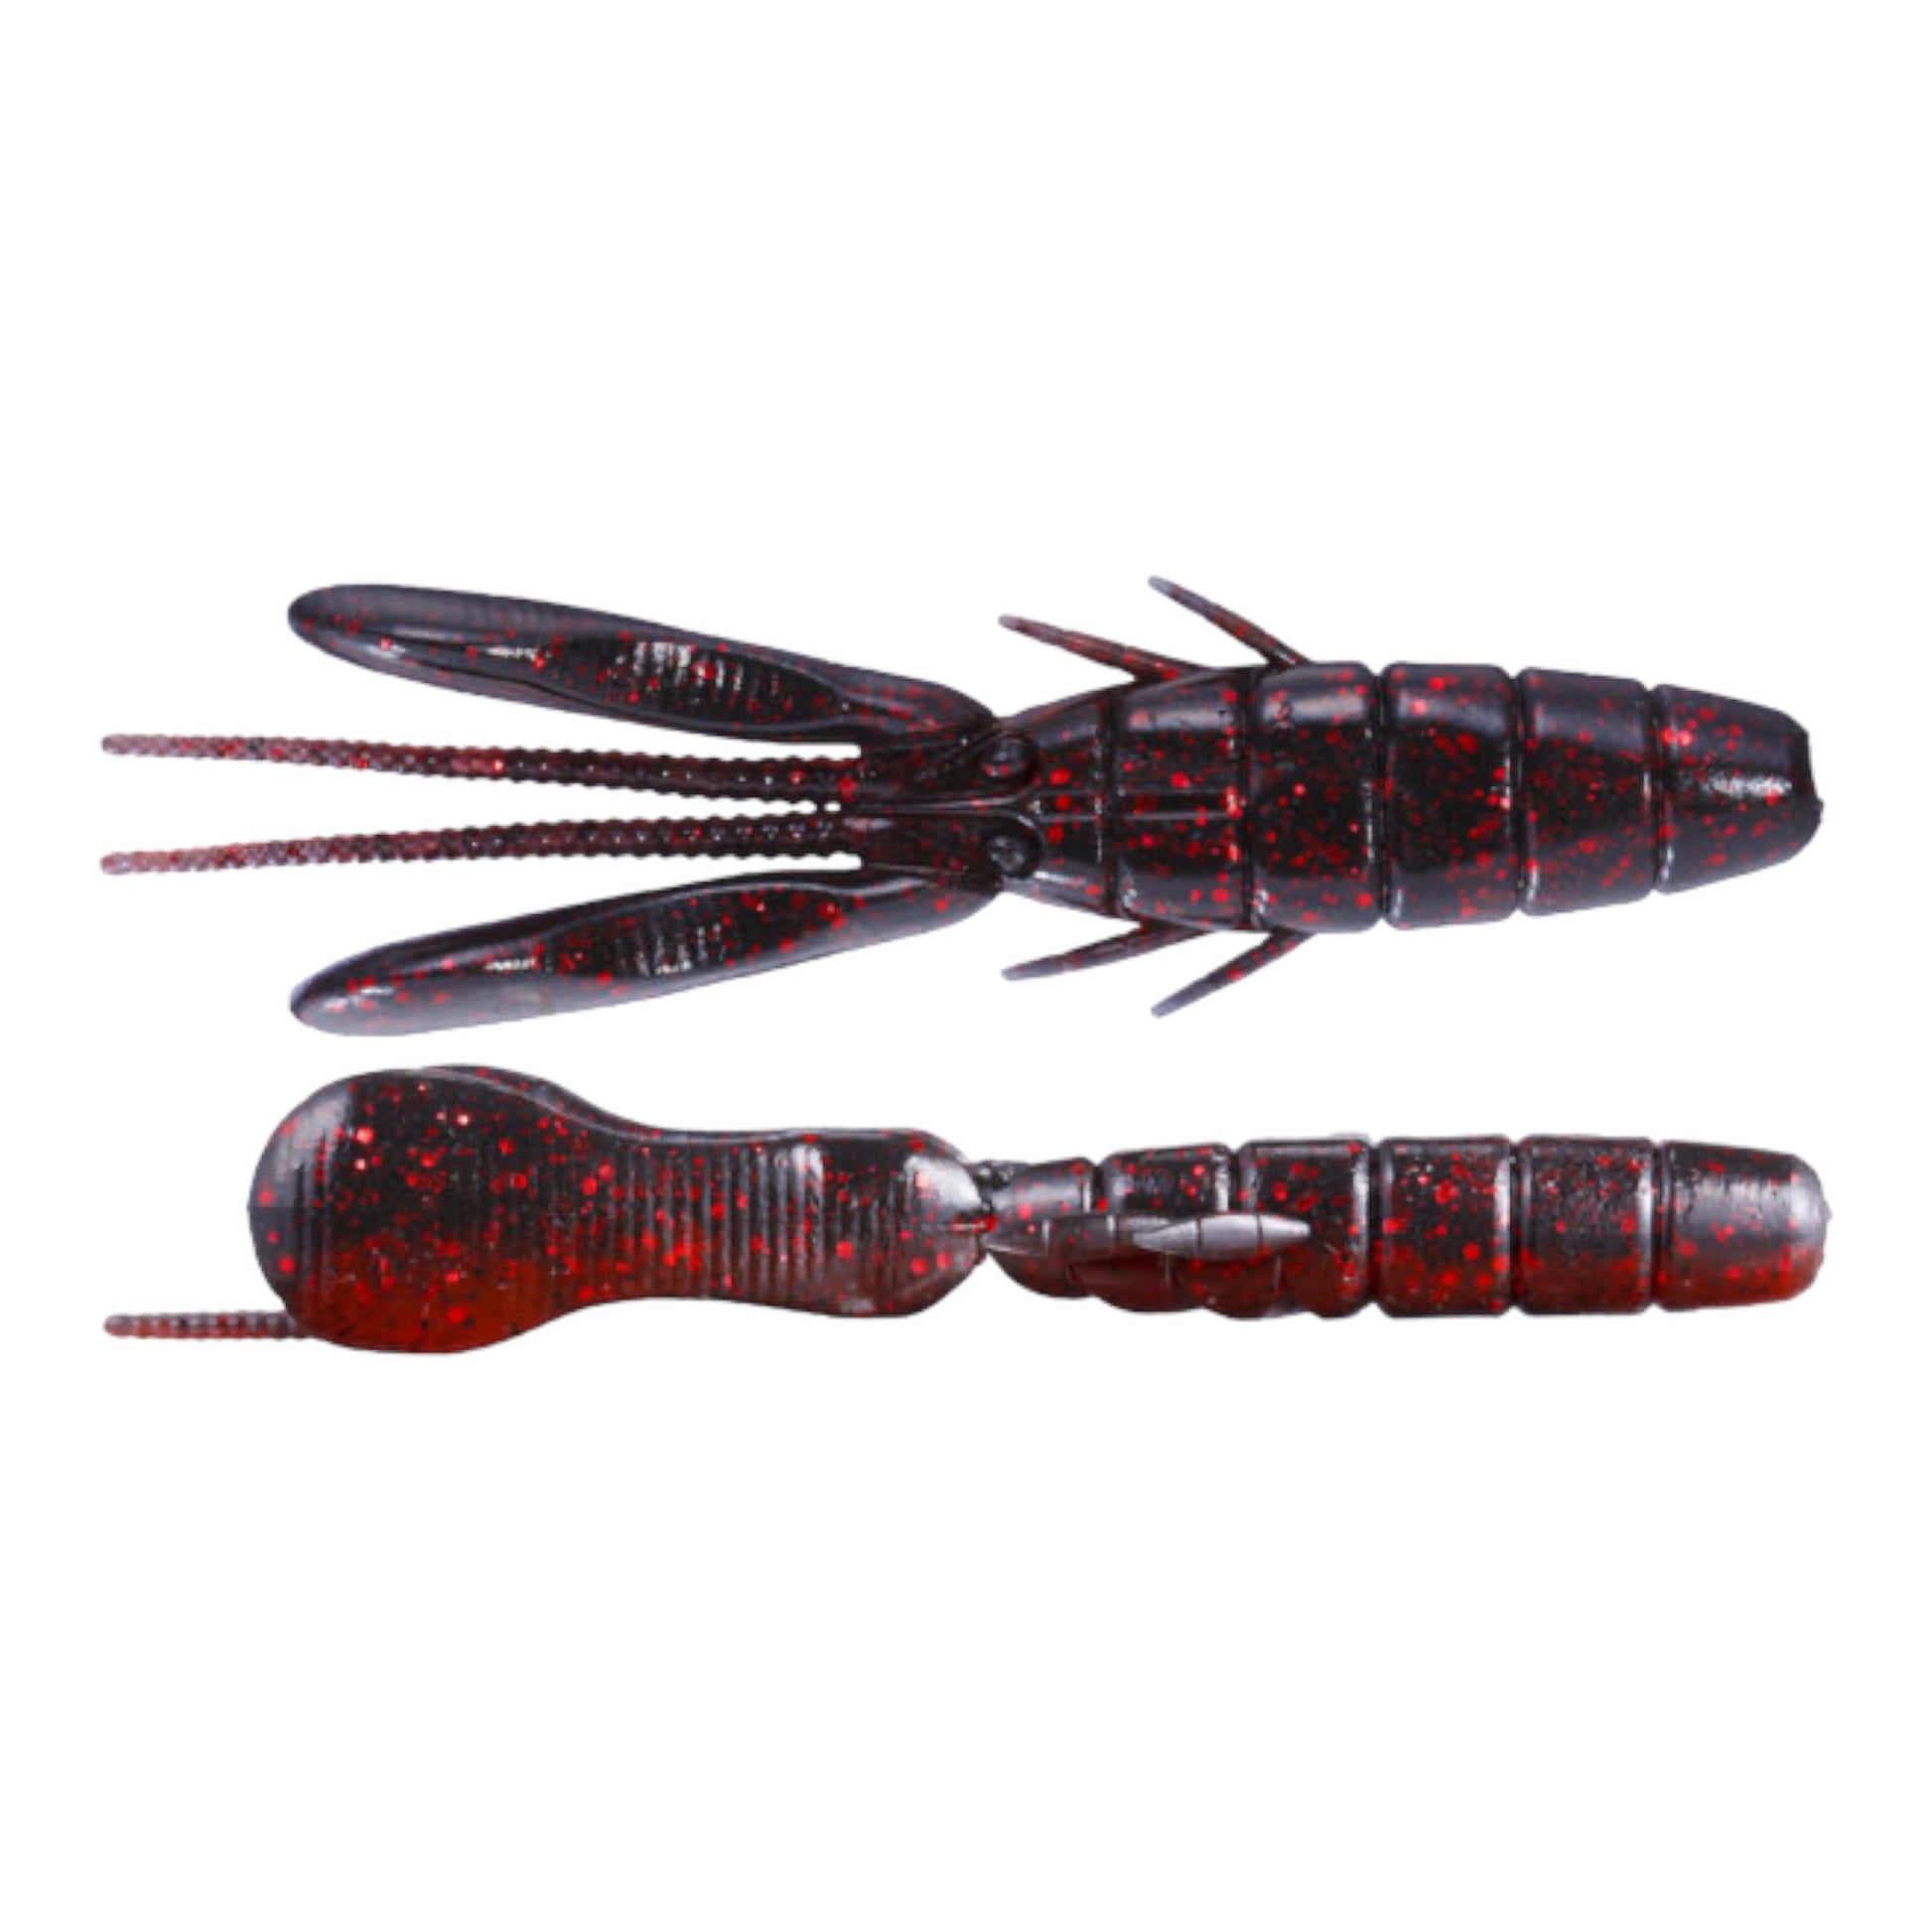 OSP DoLive Beaver Creature Bait 3 – Three Rivers Tackle